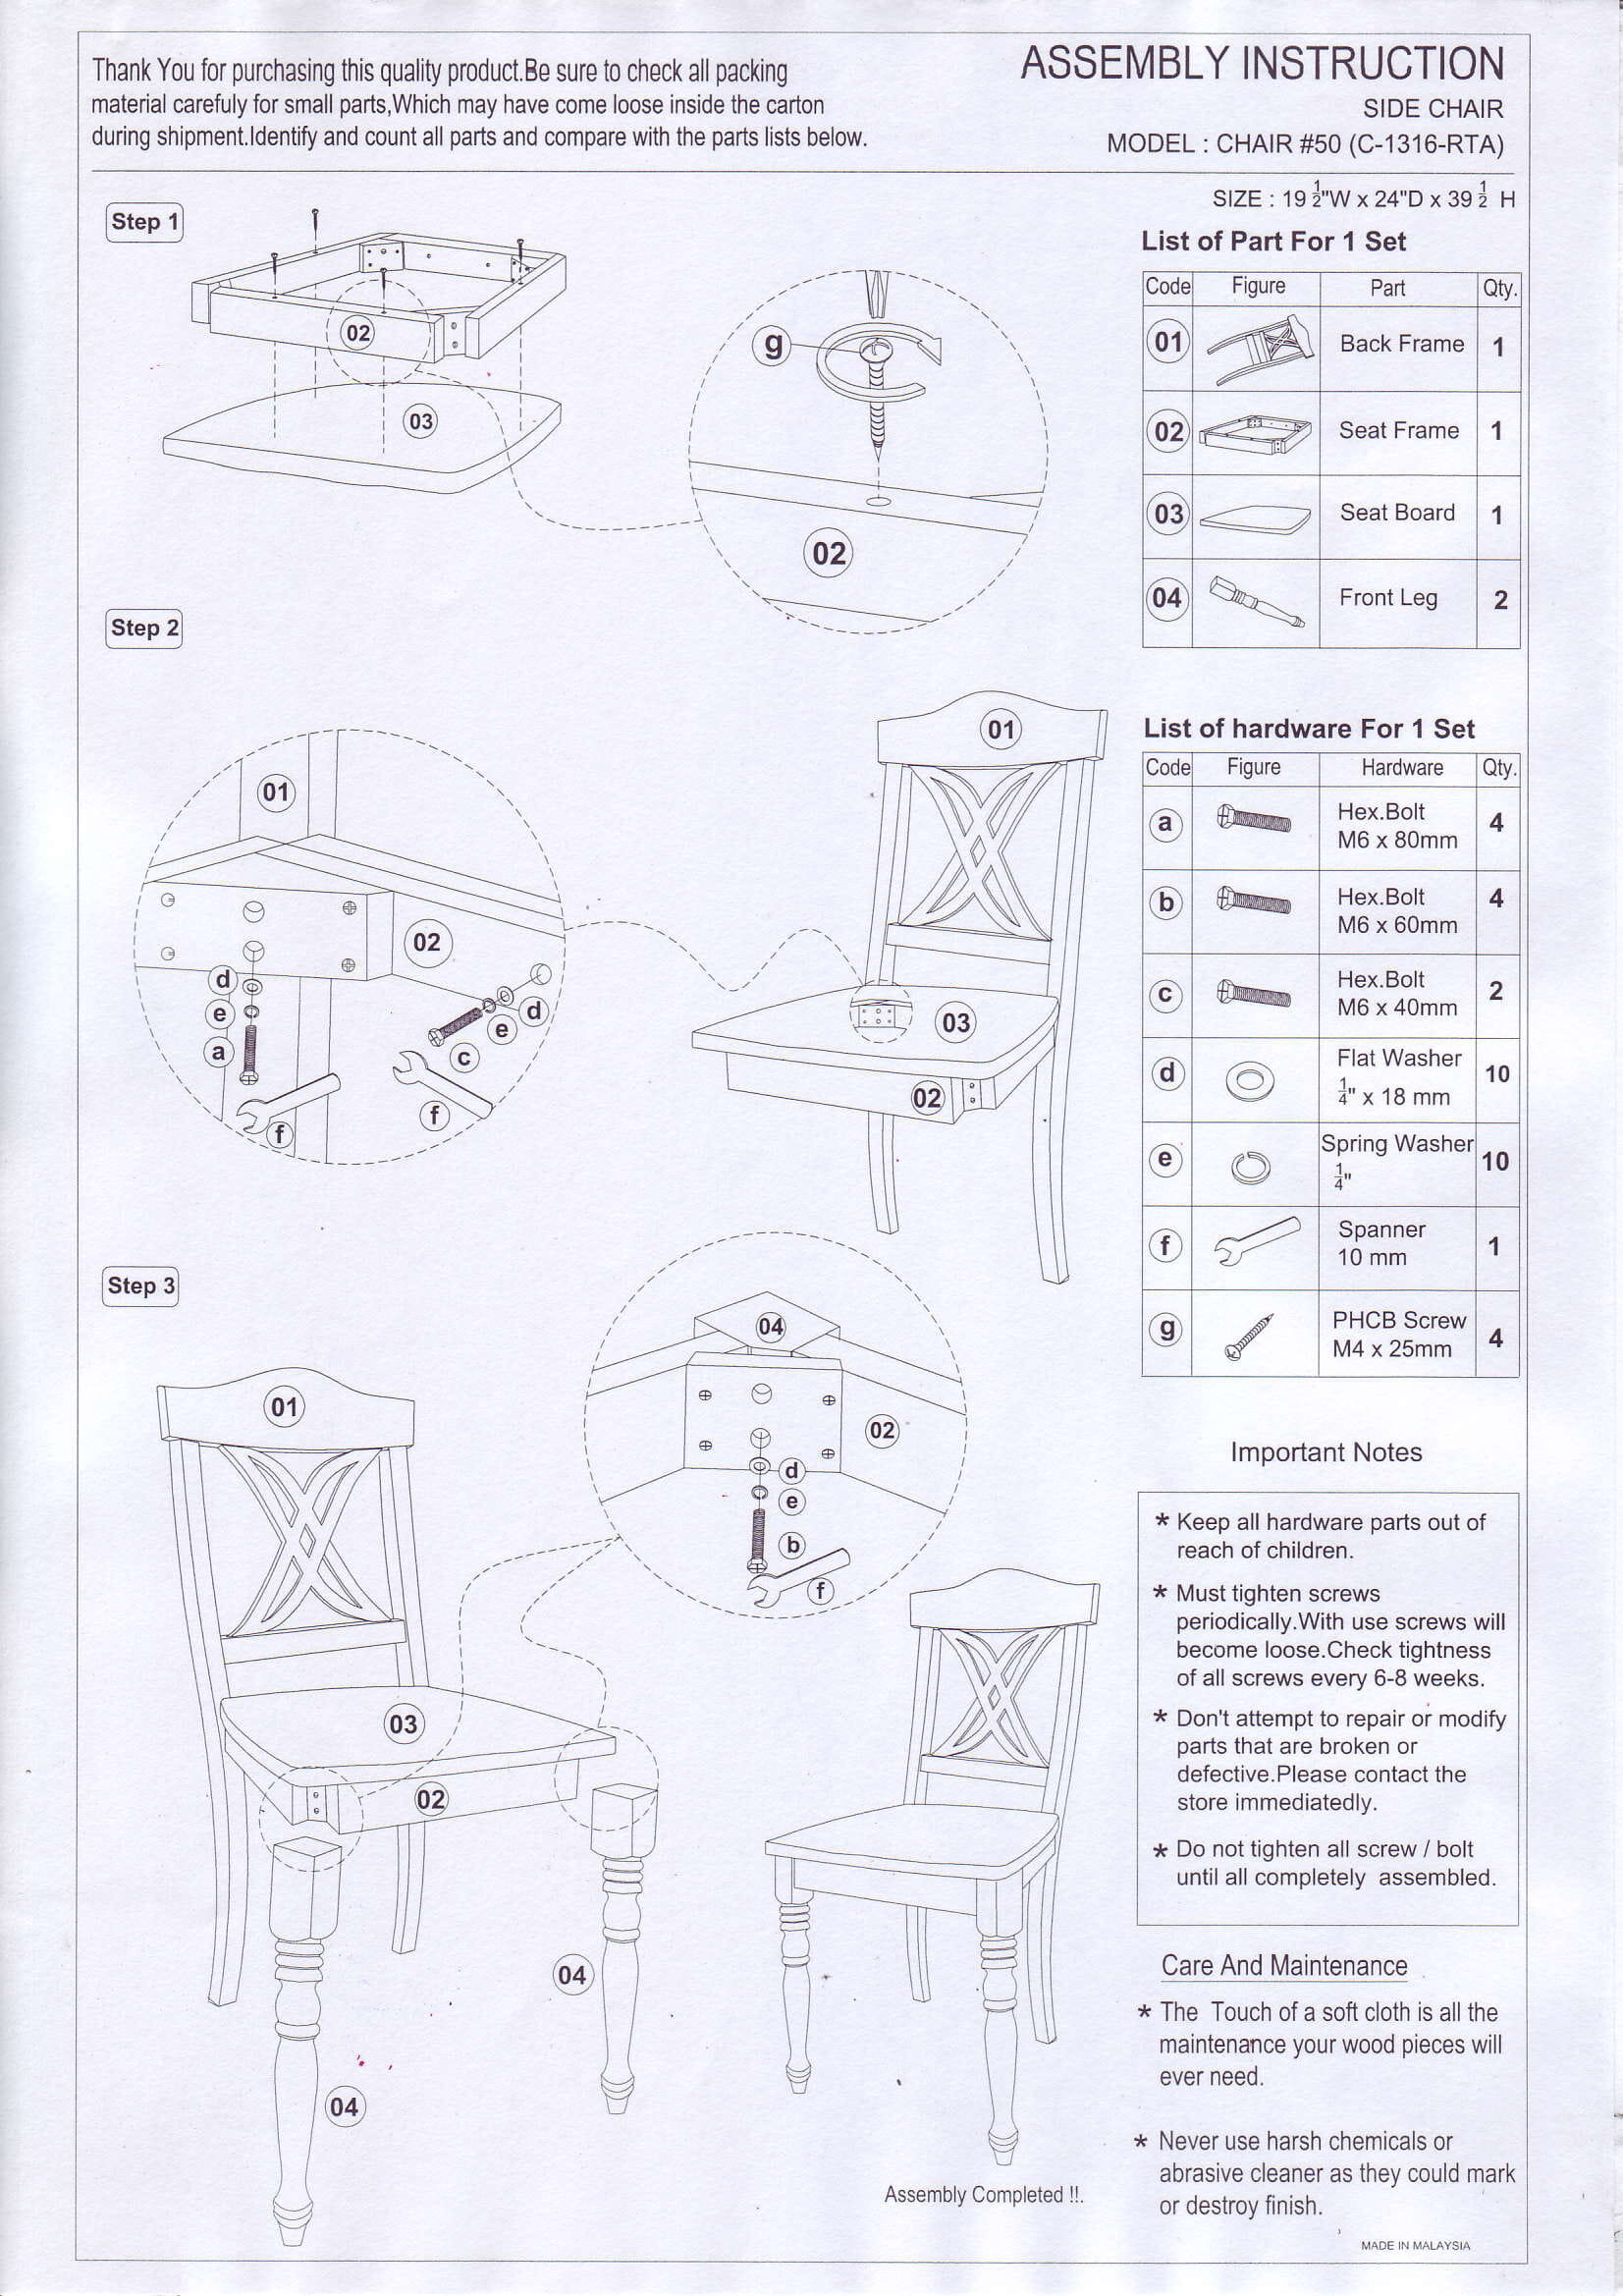 AI Chair#50 Assembly instruction-1.jpg